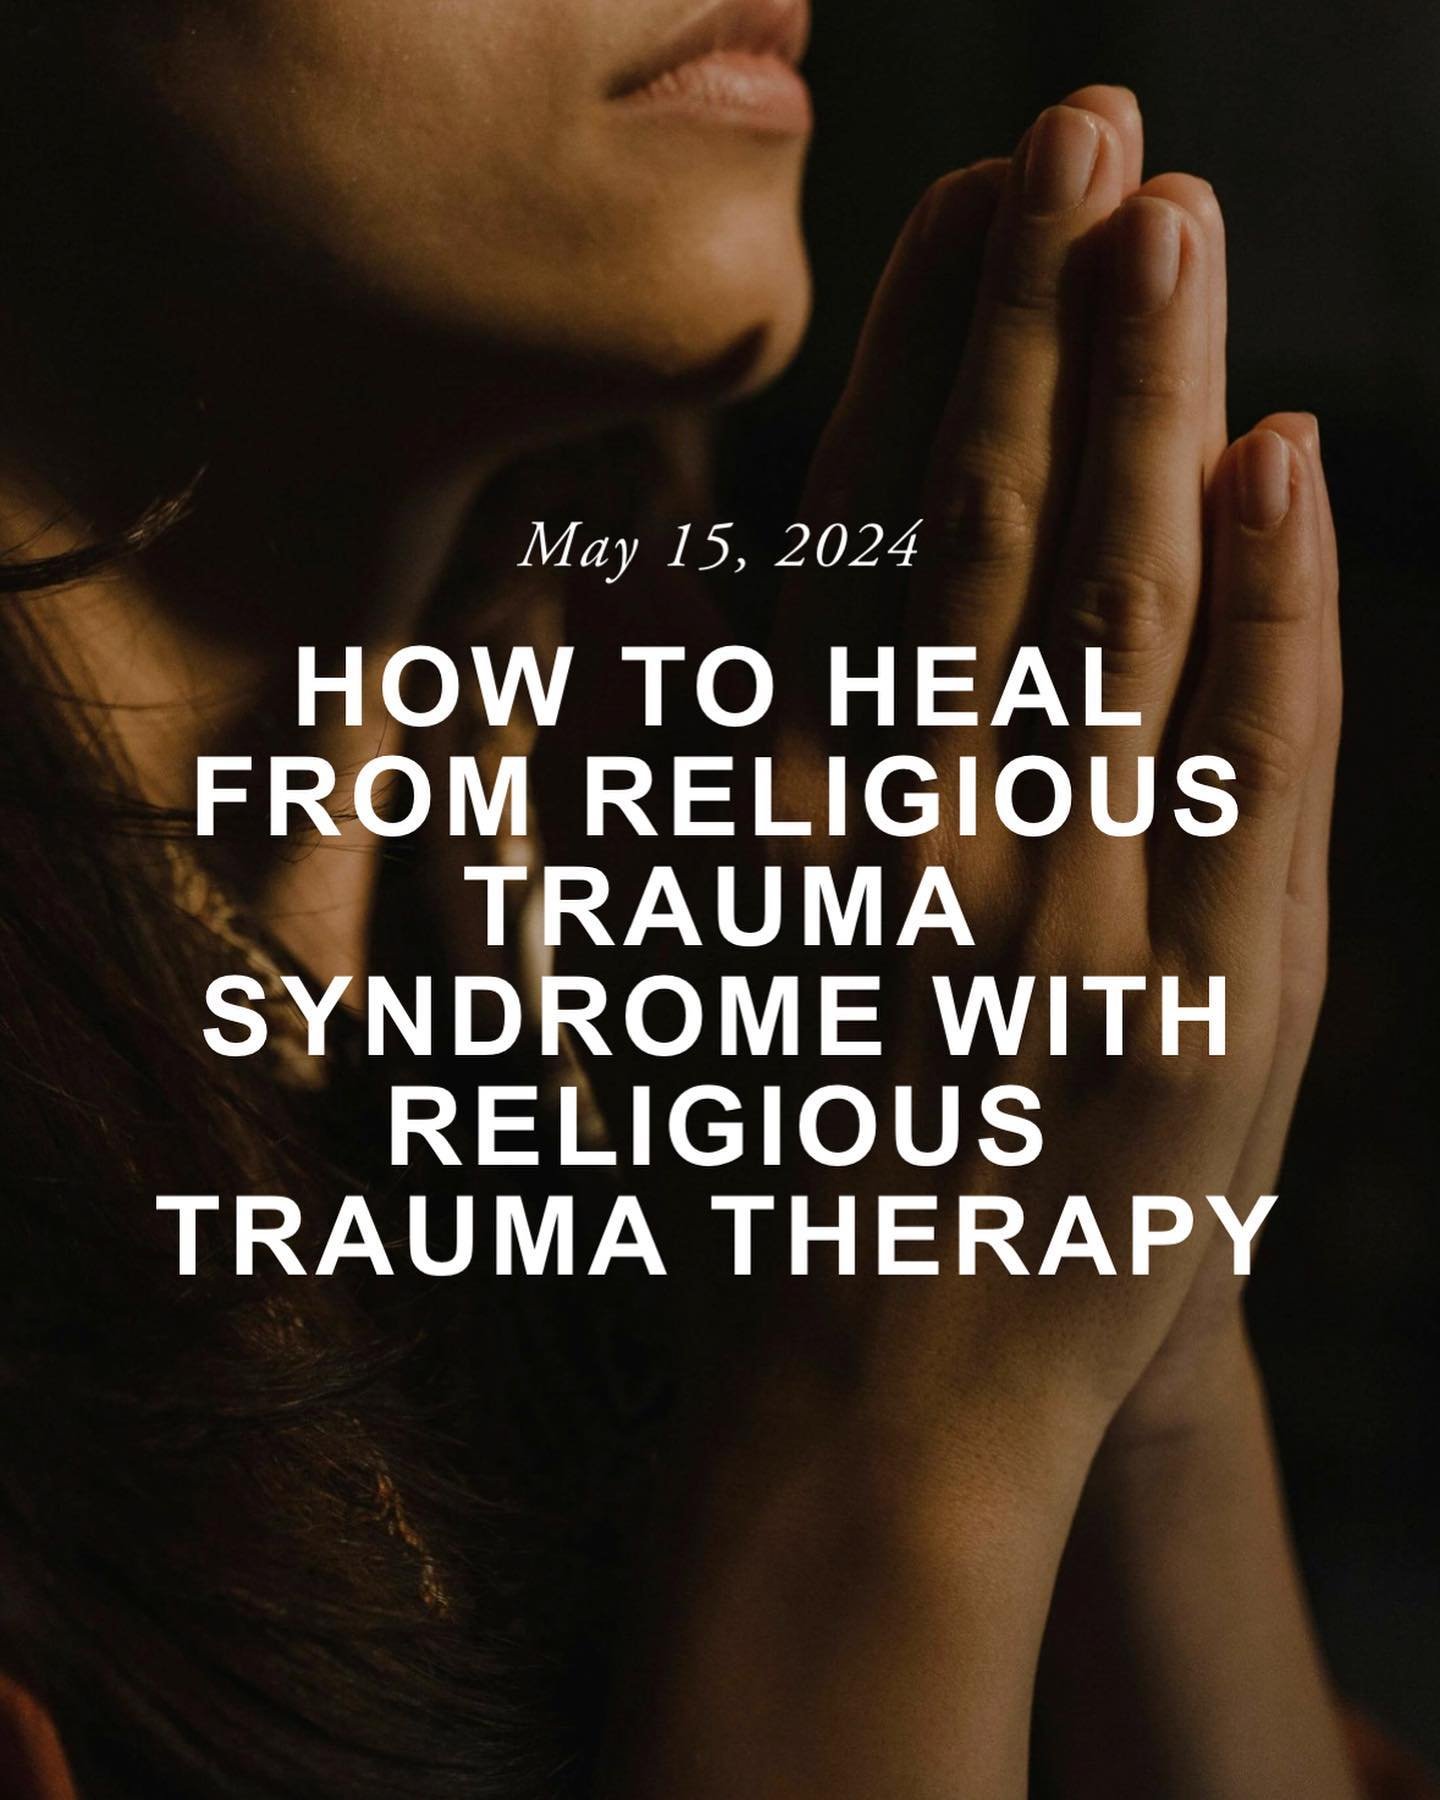 If you are struggling with religious trauma, this blog is a must-read.

&ldquo;Religion is often viewed as a safe space for many people. You meet with a community of people who share the same values and beliefs as you on a regular basis to worship yo